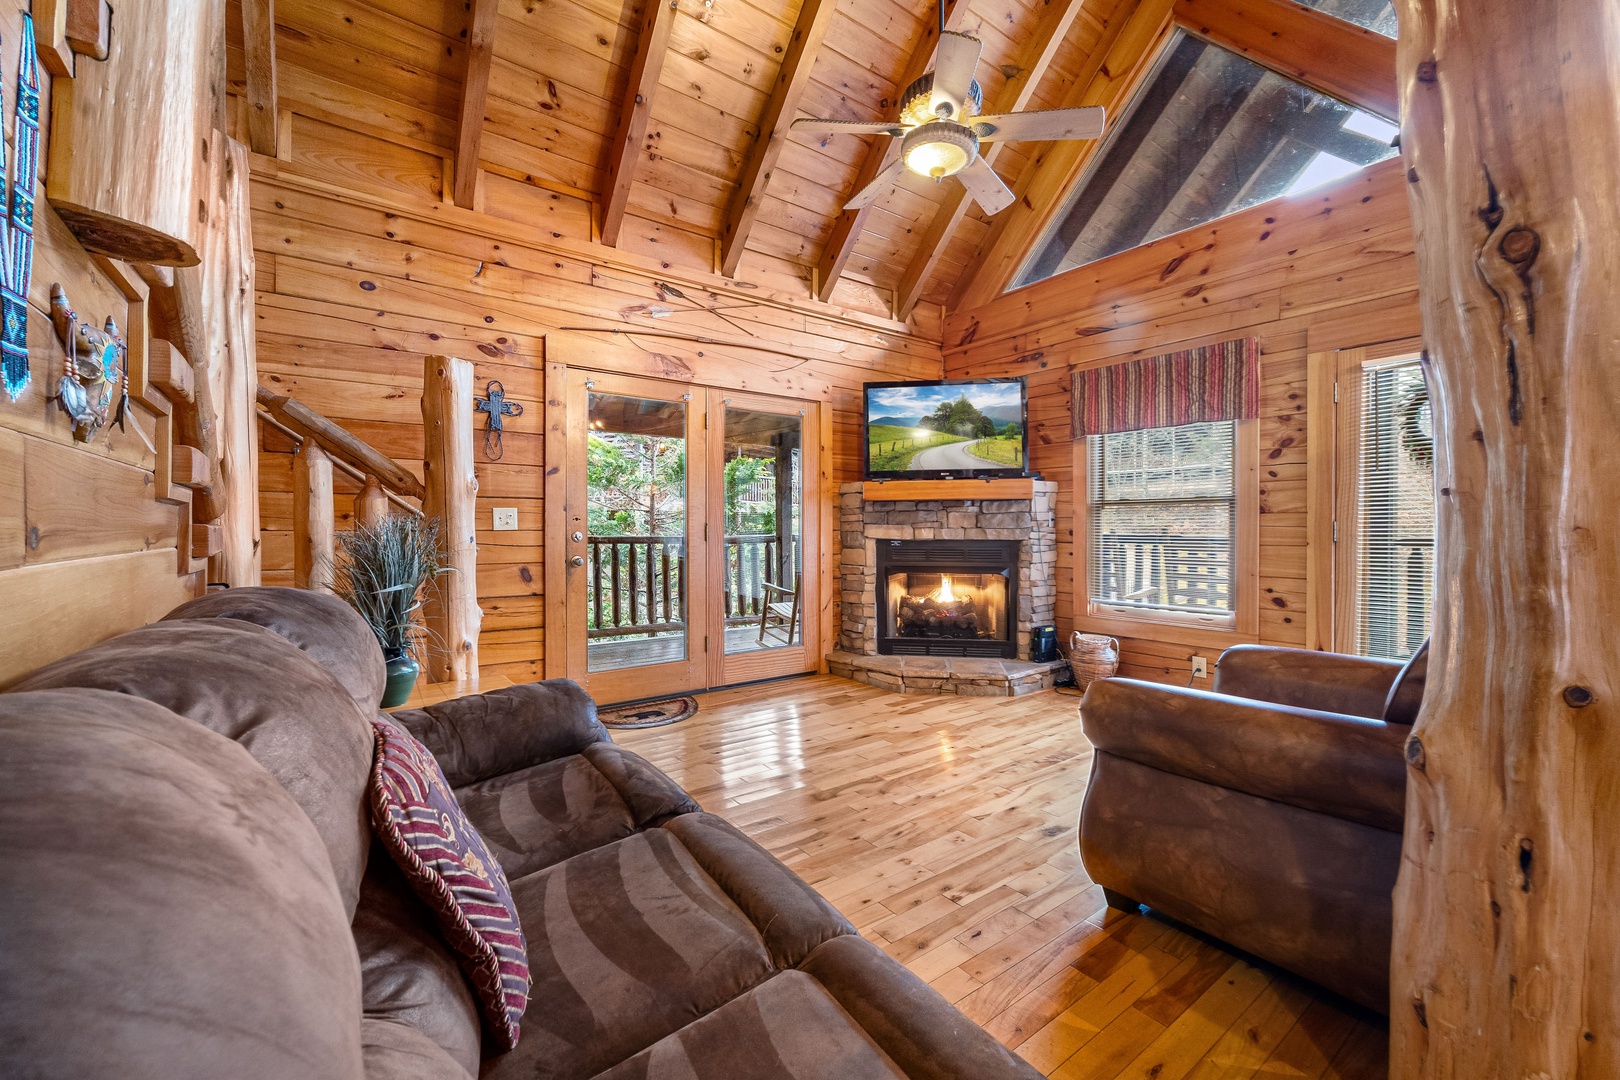 Living room with fireplace and TV at Alpine Sondance, a 2 bedroom cabin rental located in Pigeon Forge